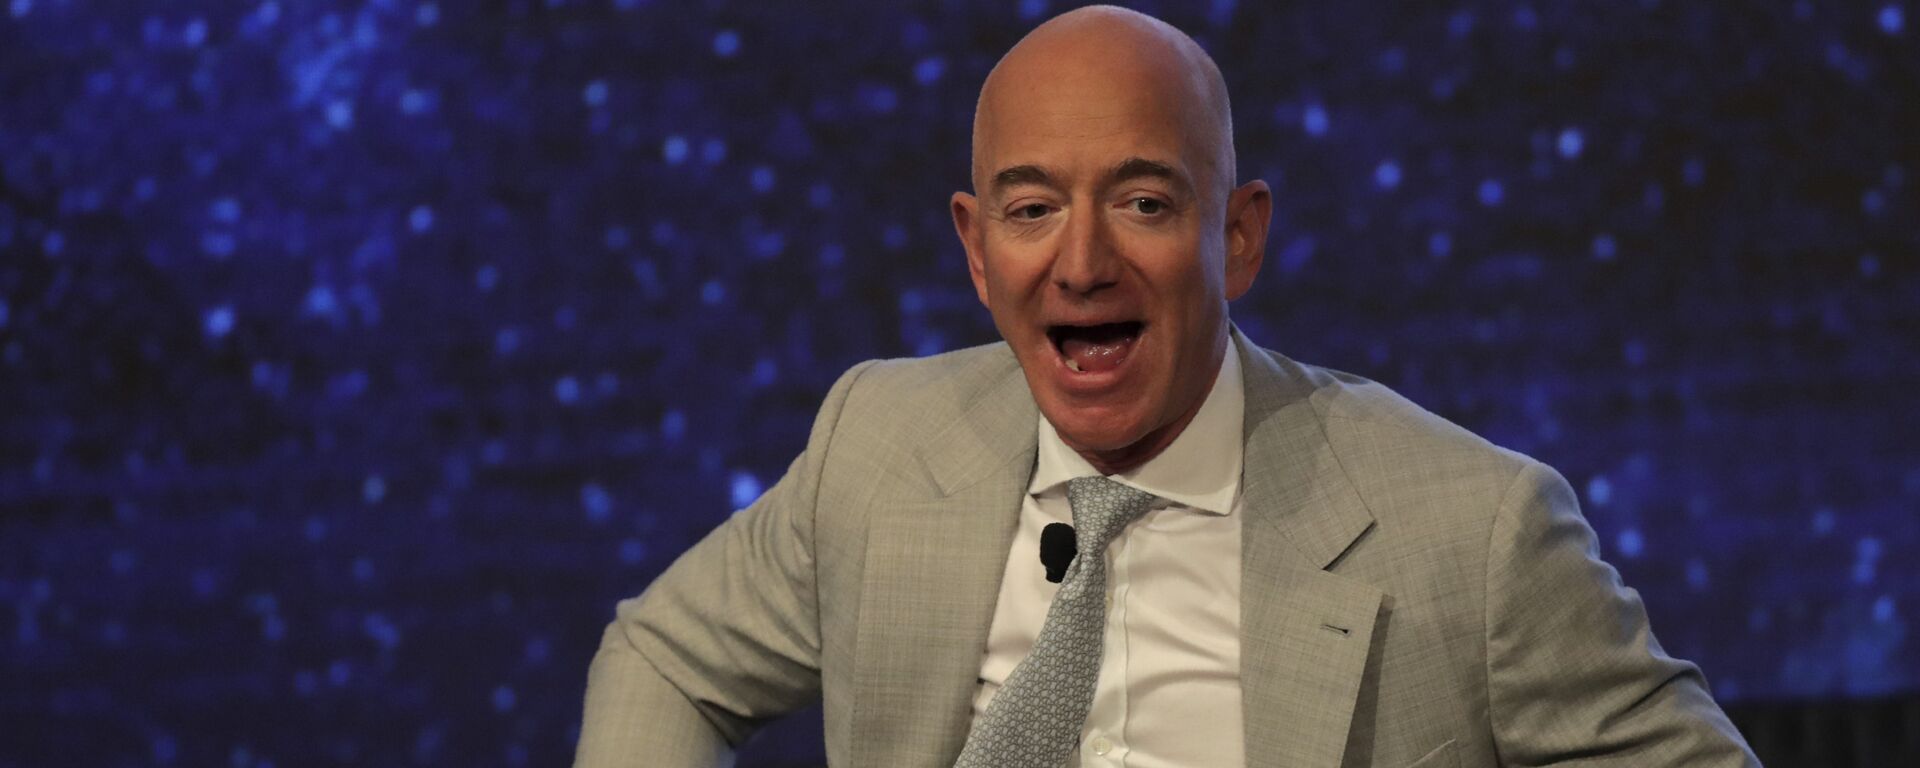 Amazon founder Jeff Bezos during the JFK Space Summit at the John F. Kennedy Presidential Library in Boston, Wednesday, June 19, 2019 - Sputnik International, 1920, 11.02.2022